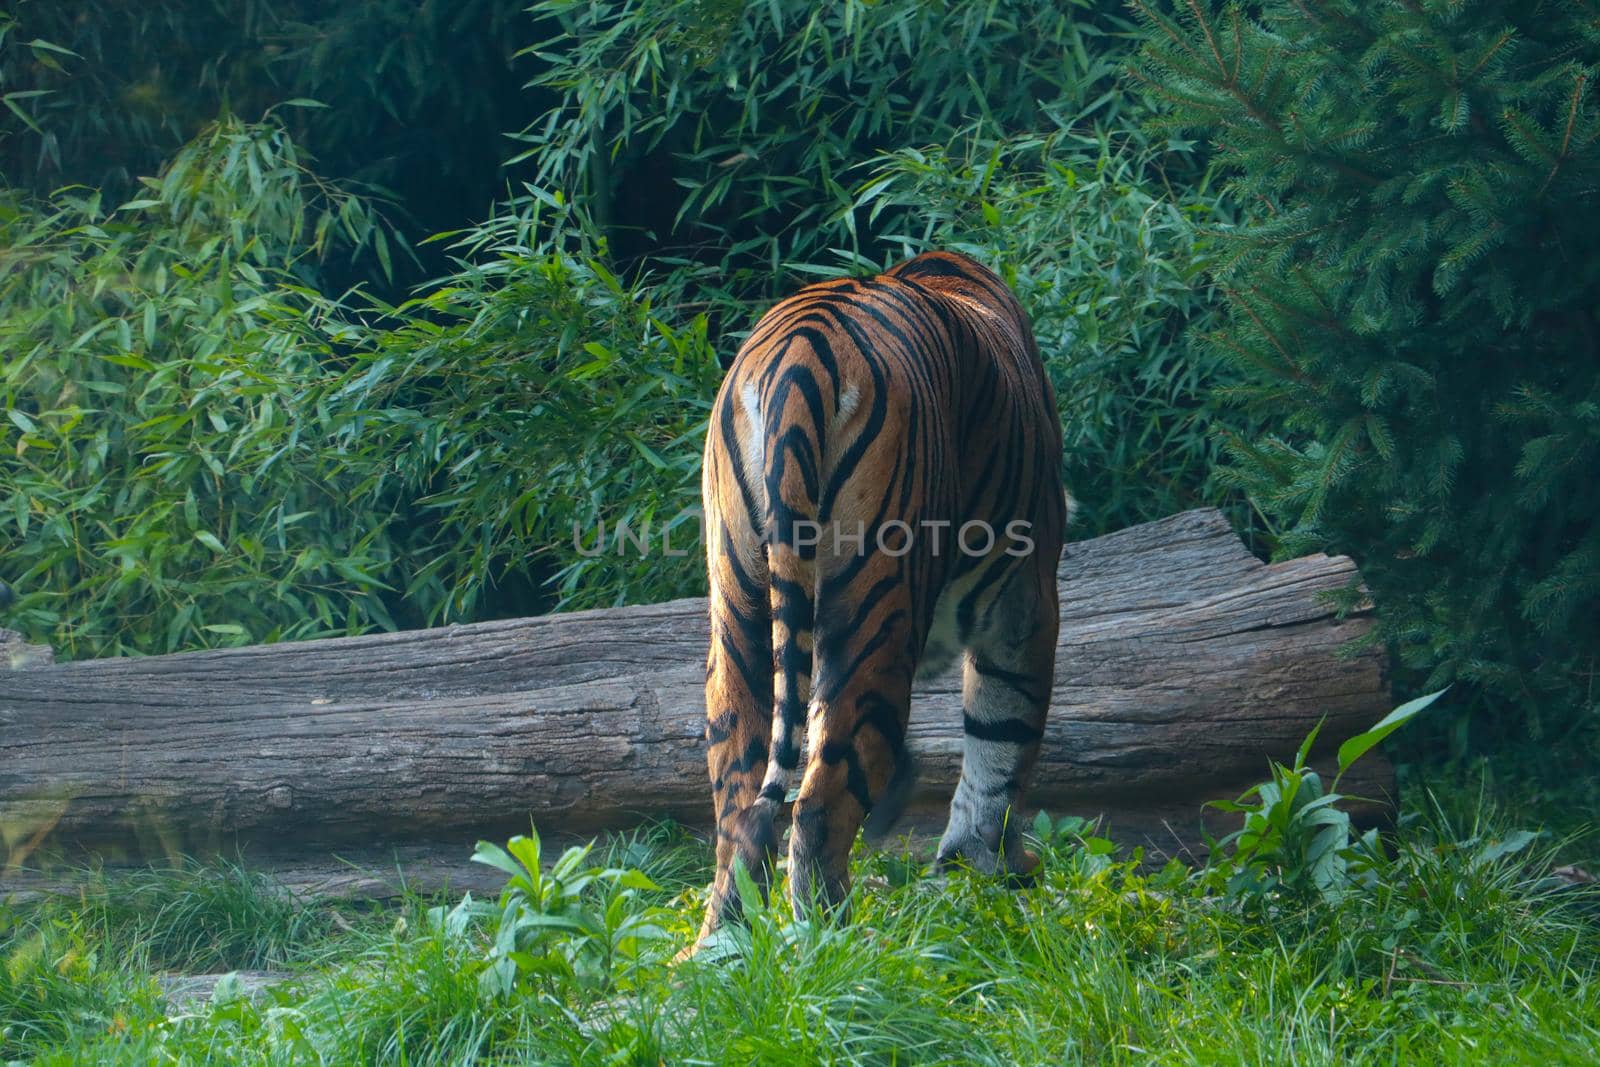 Rear view of a departing tiger in the wild. Predatory cat. by kip02kas